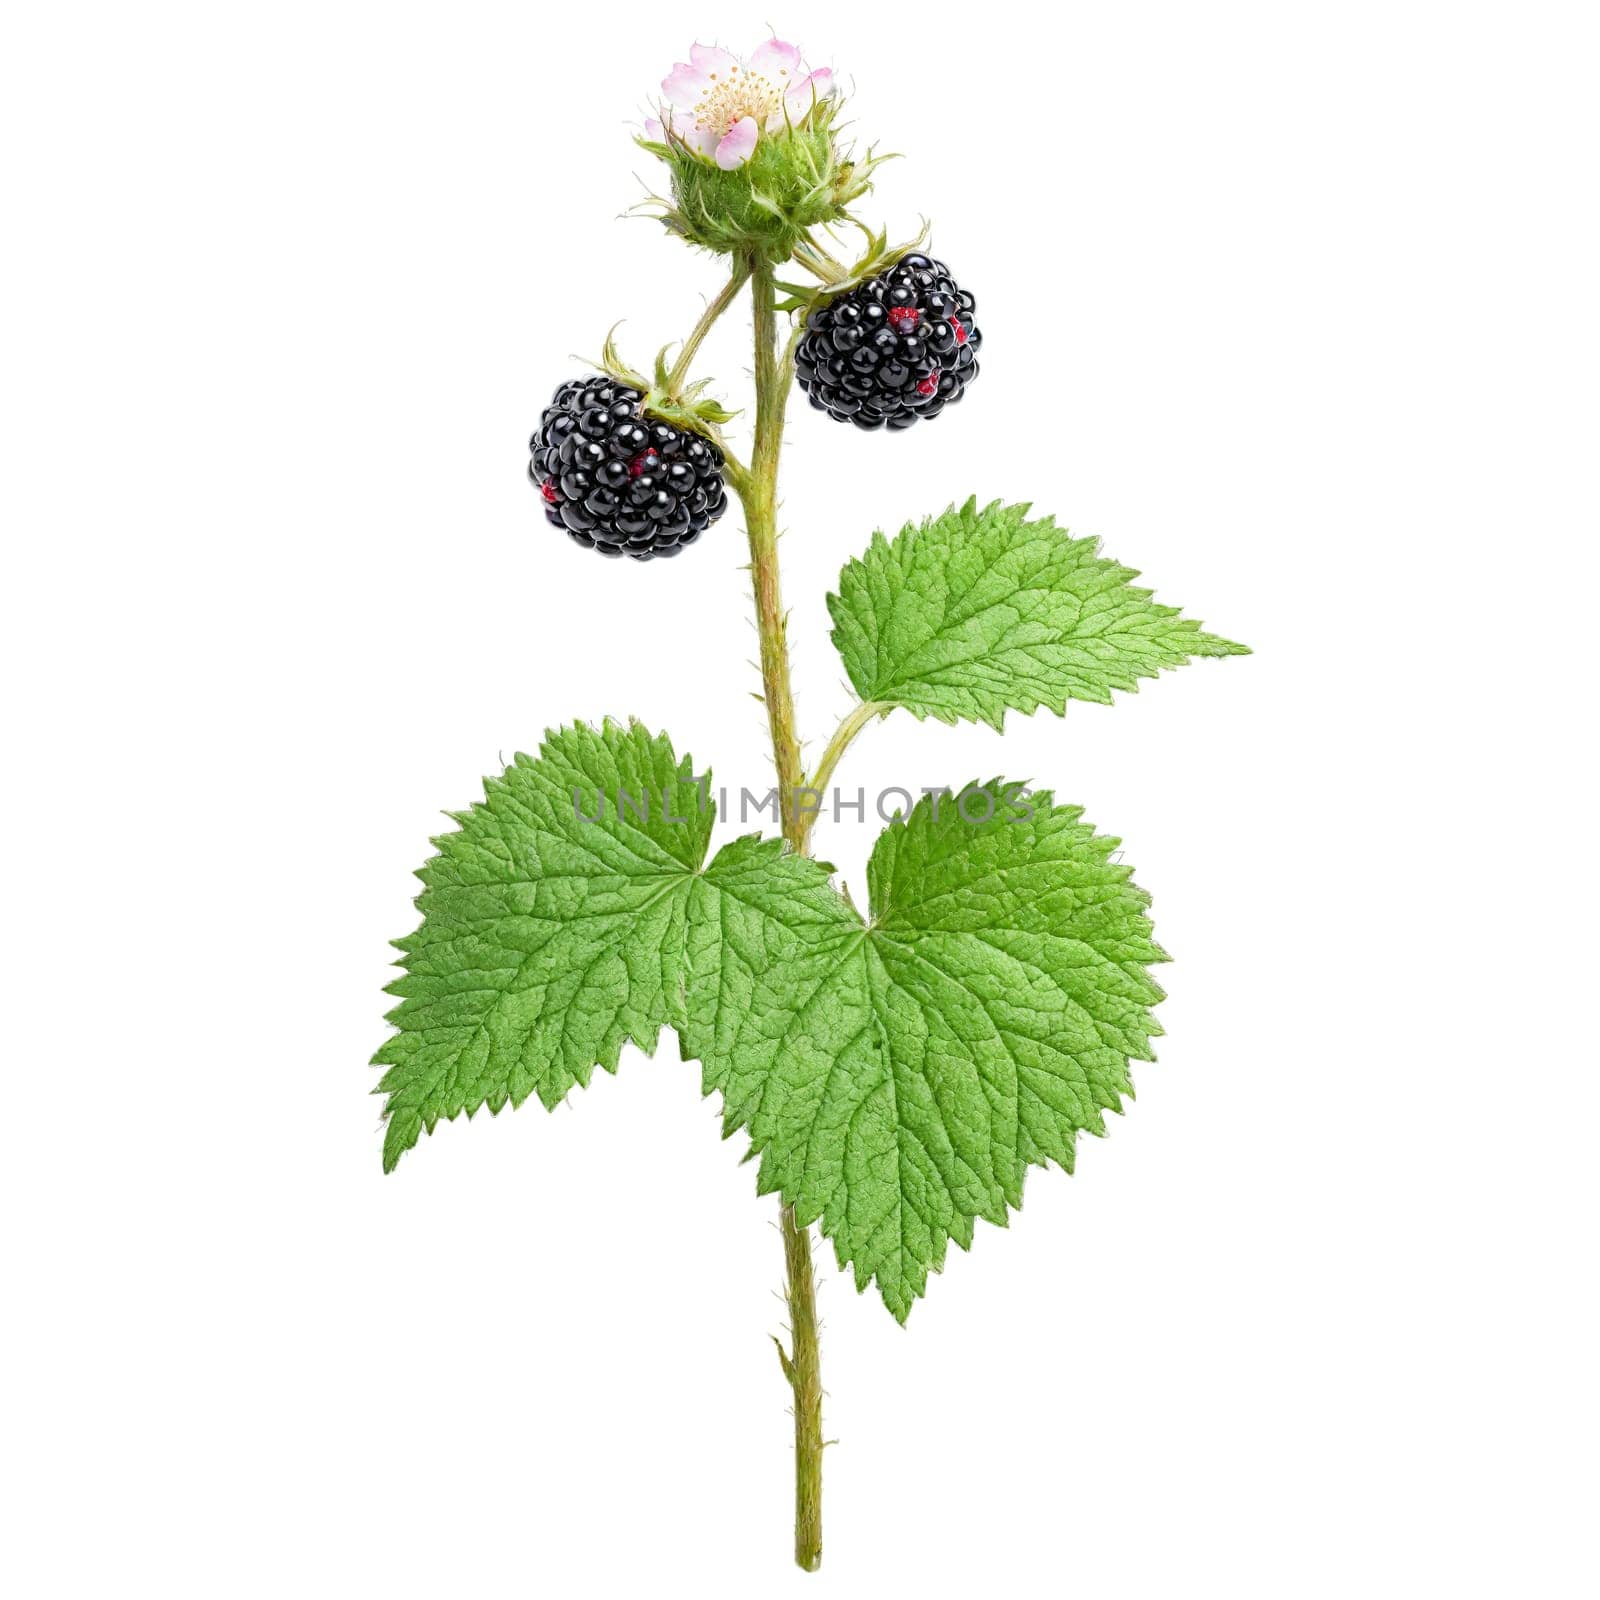 Dewberry Bush low growing shrub with prickly stems and compound leaves and black juicy fruits by panophotograph